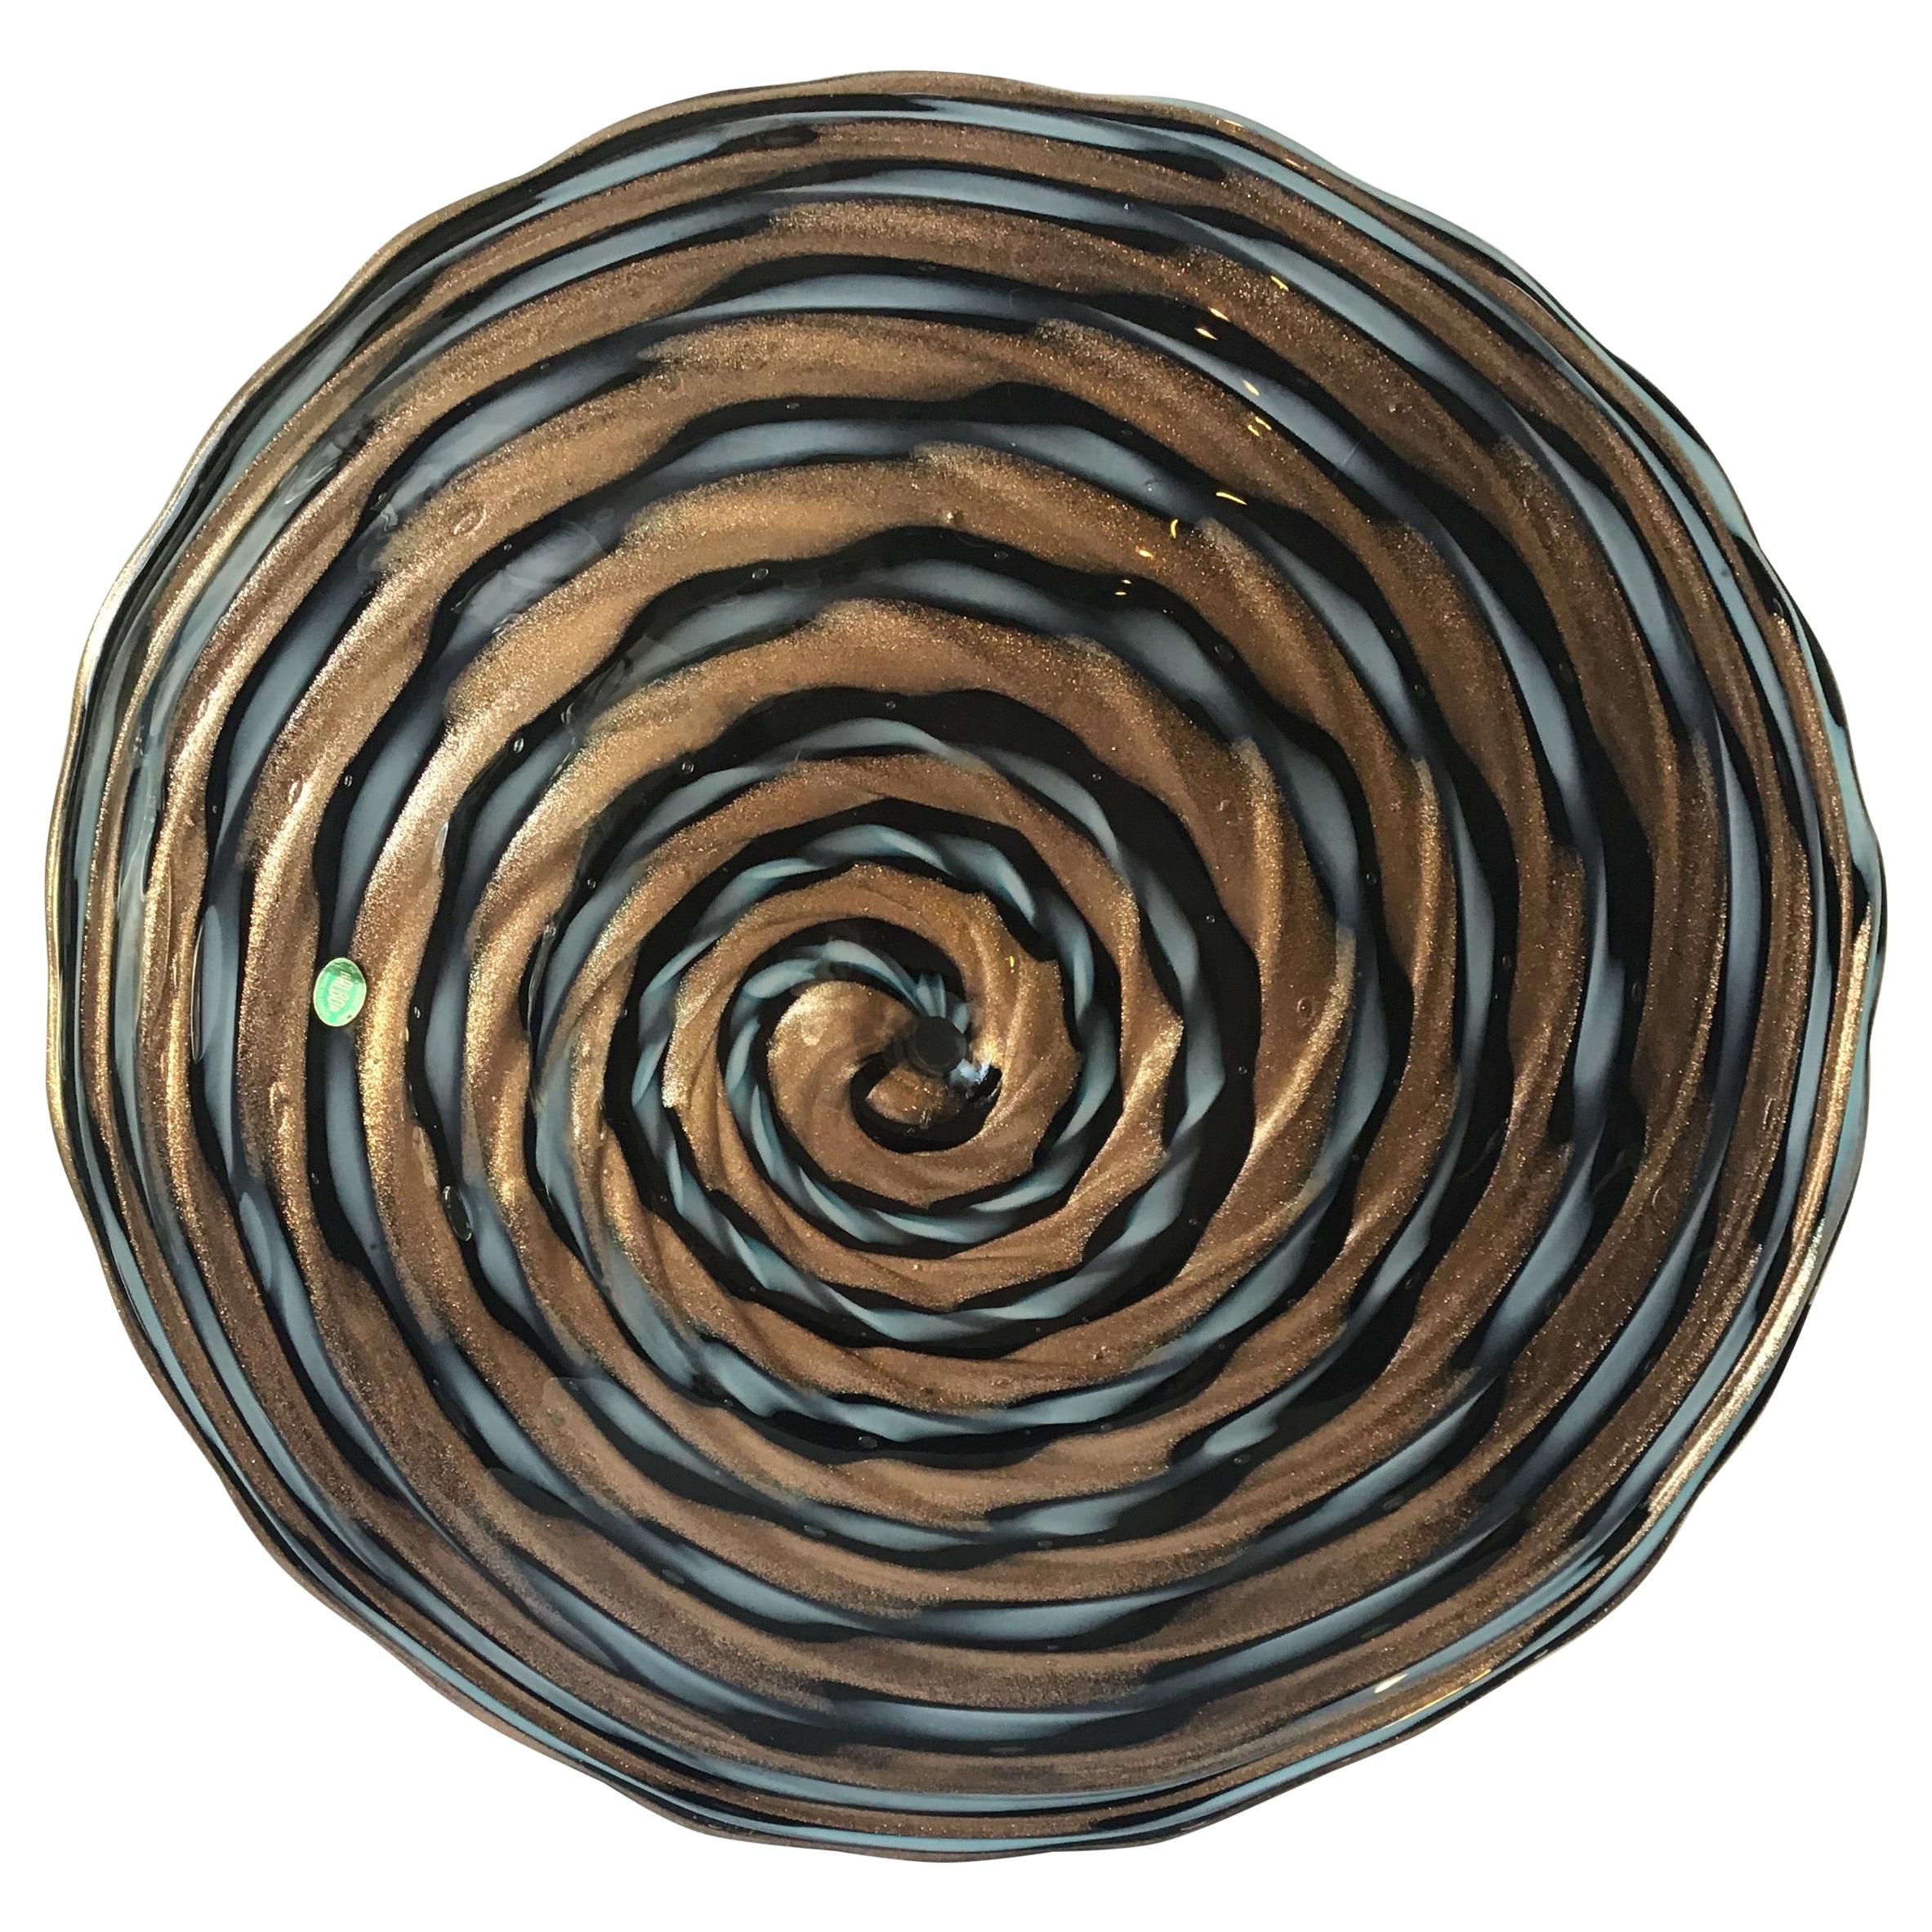 1960s Murano Swirled Glass Table Top by Balboa For Sale